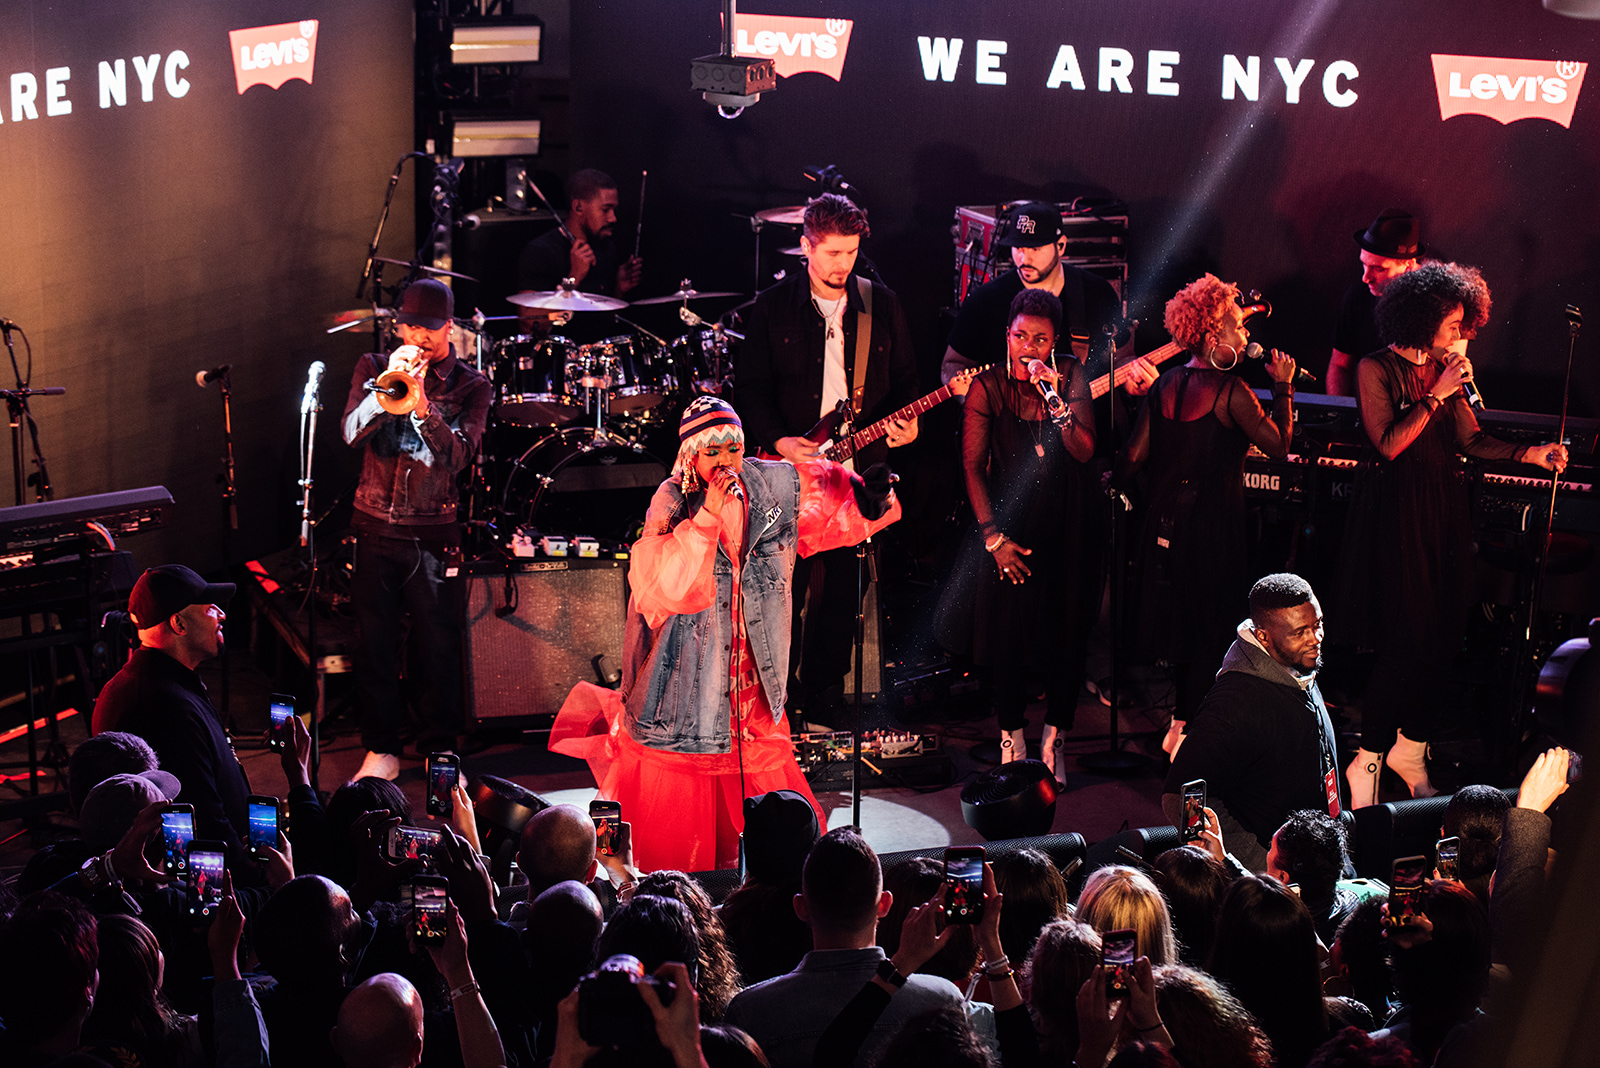 FLOOD - LIVE, IN PHOTOS: Levi's Times Square Grand Opening with Ms. Lauryn  Hill, Joey Bada$$, Chic, and Q-Tip